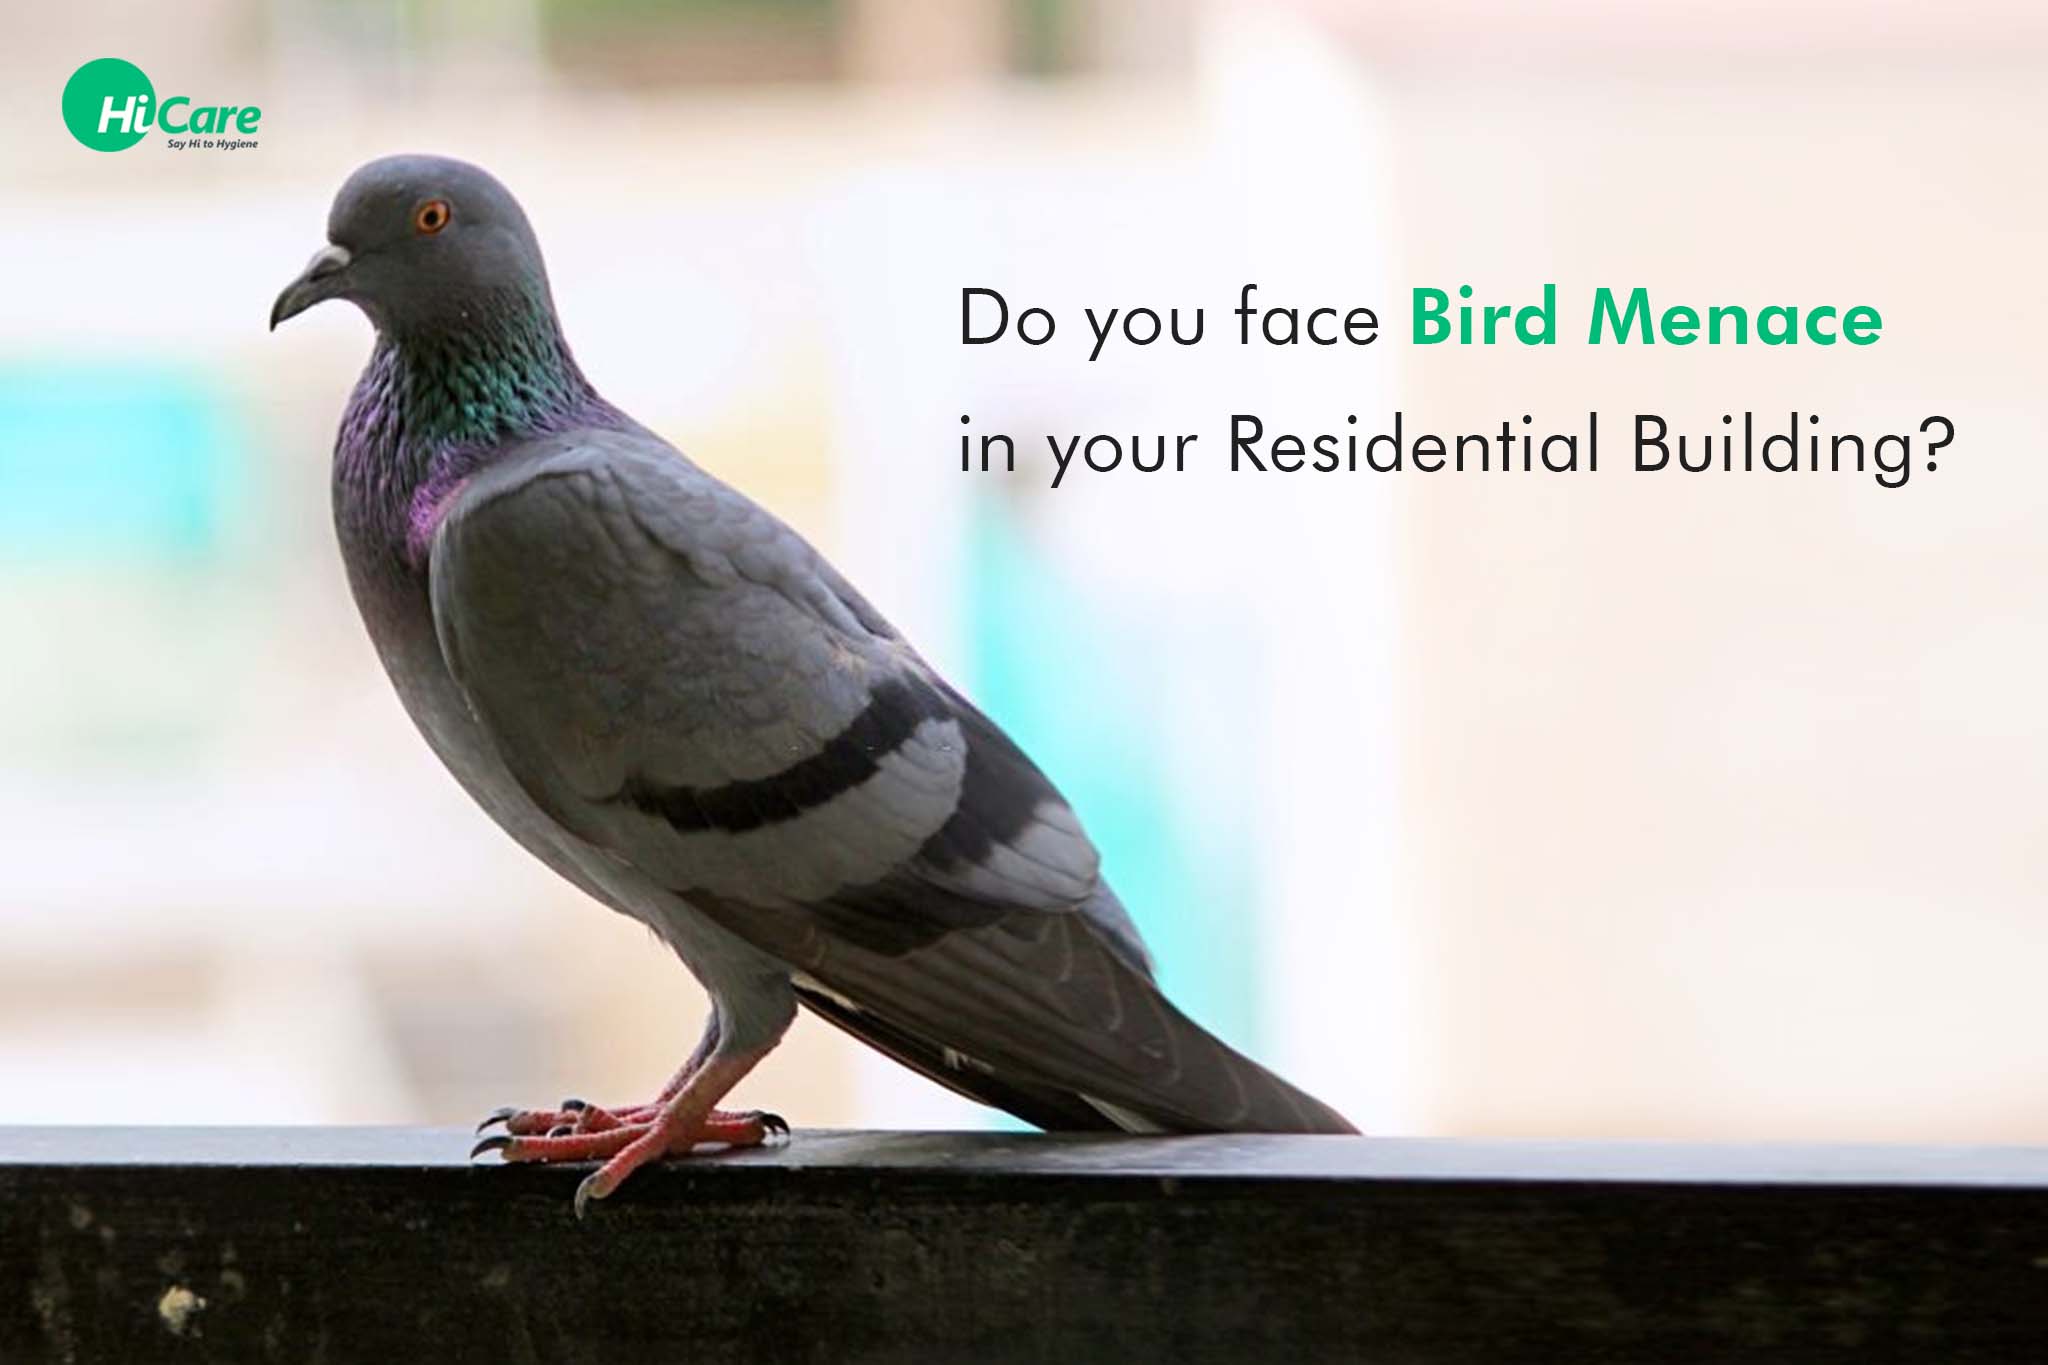 Do you face Bird Menace in your Residential Building?